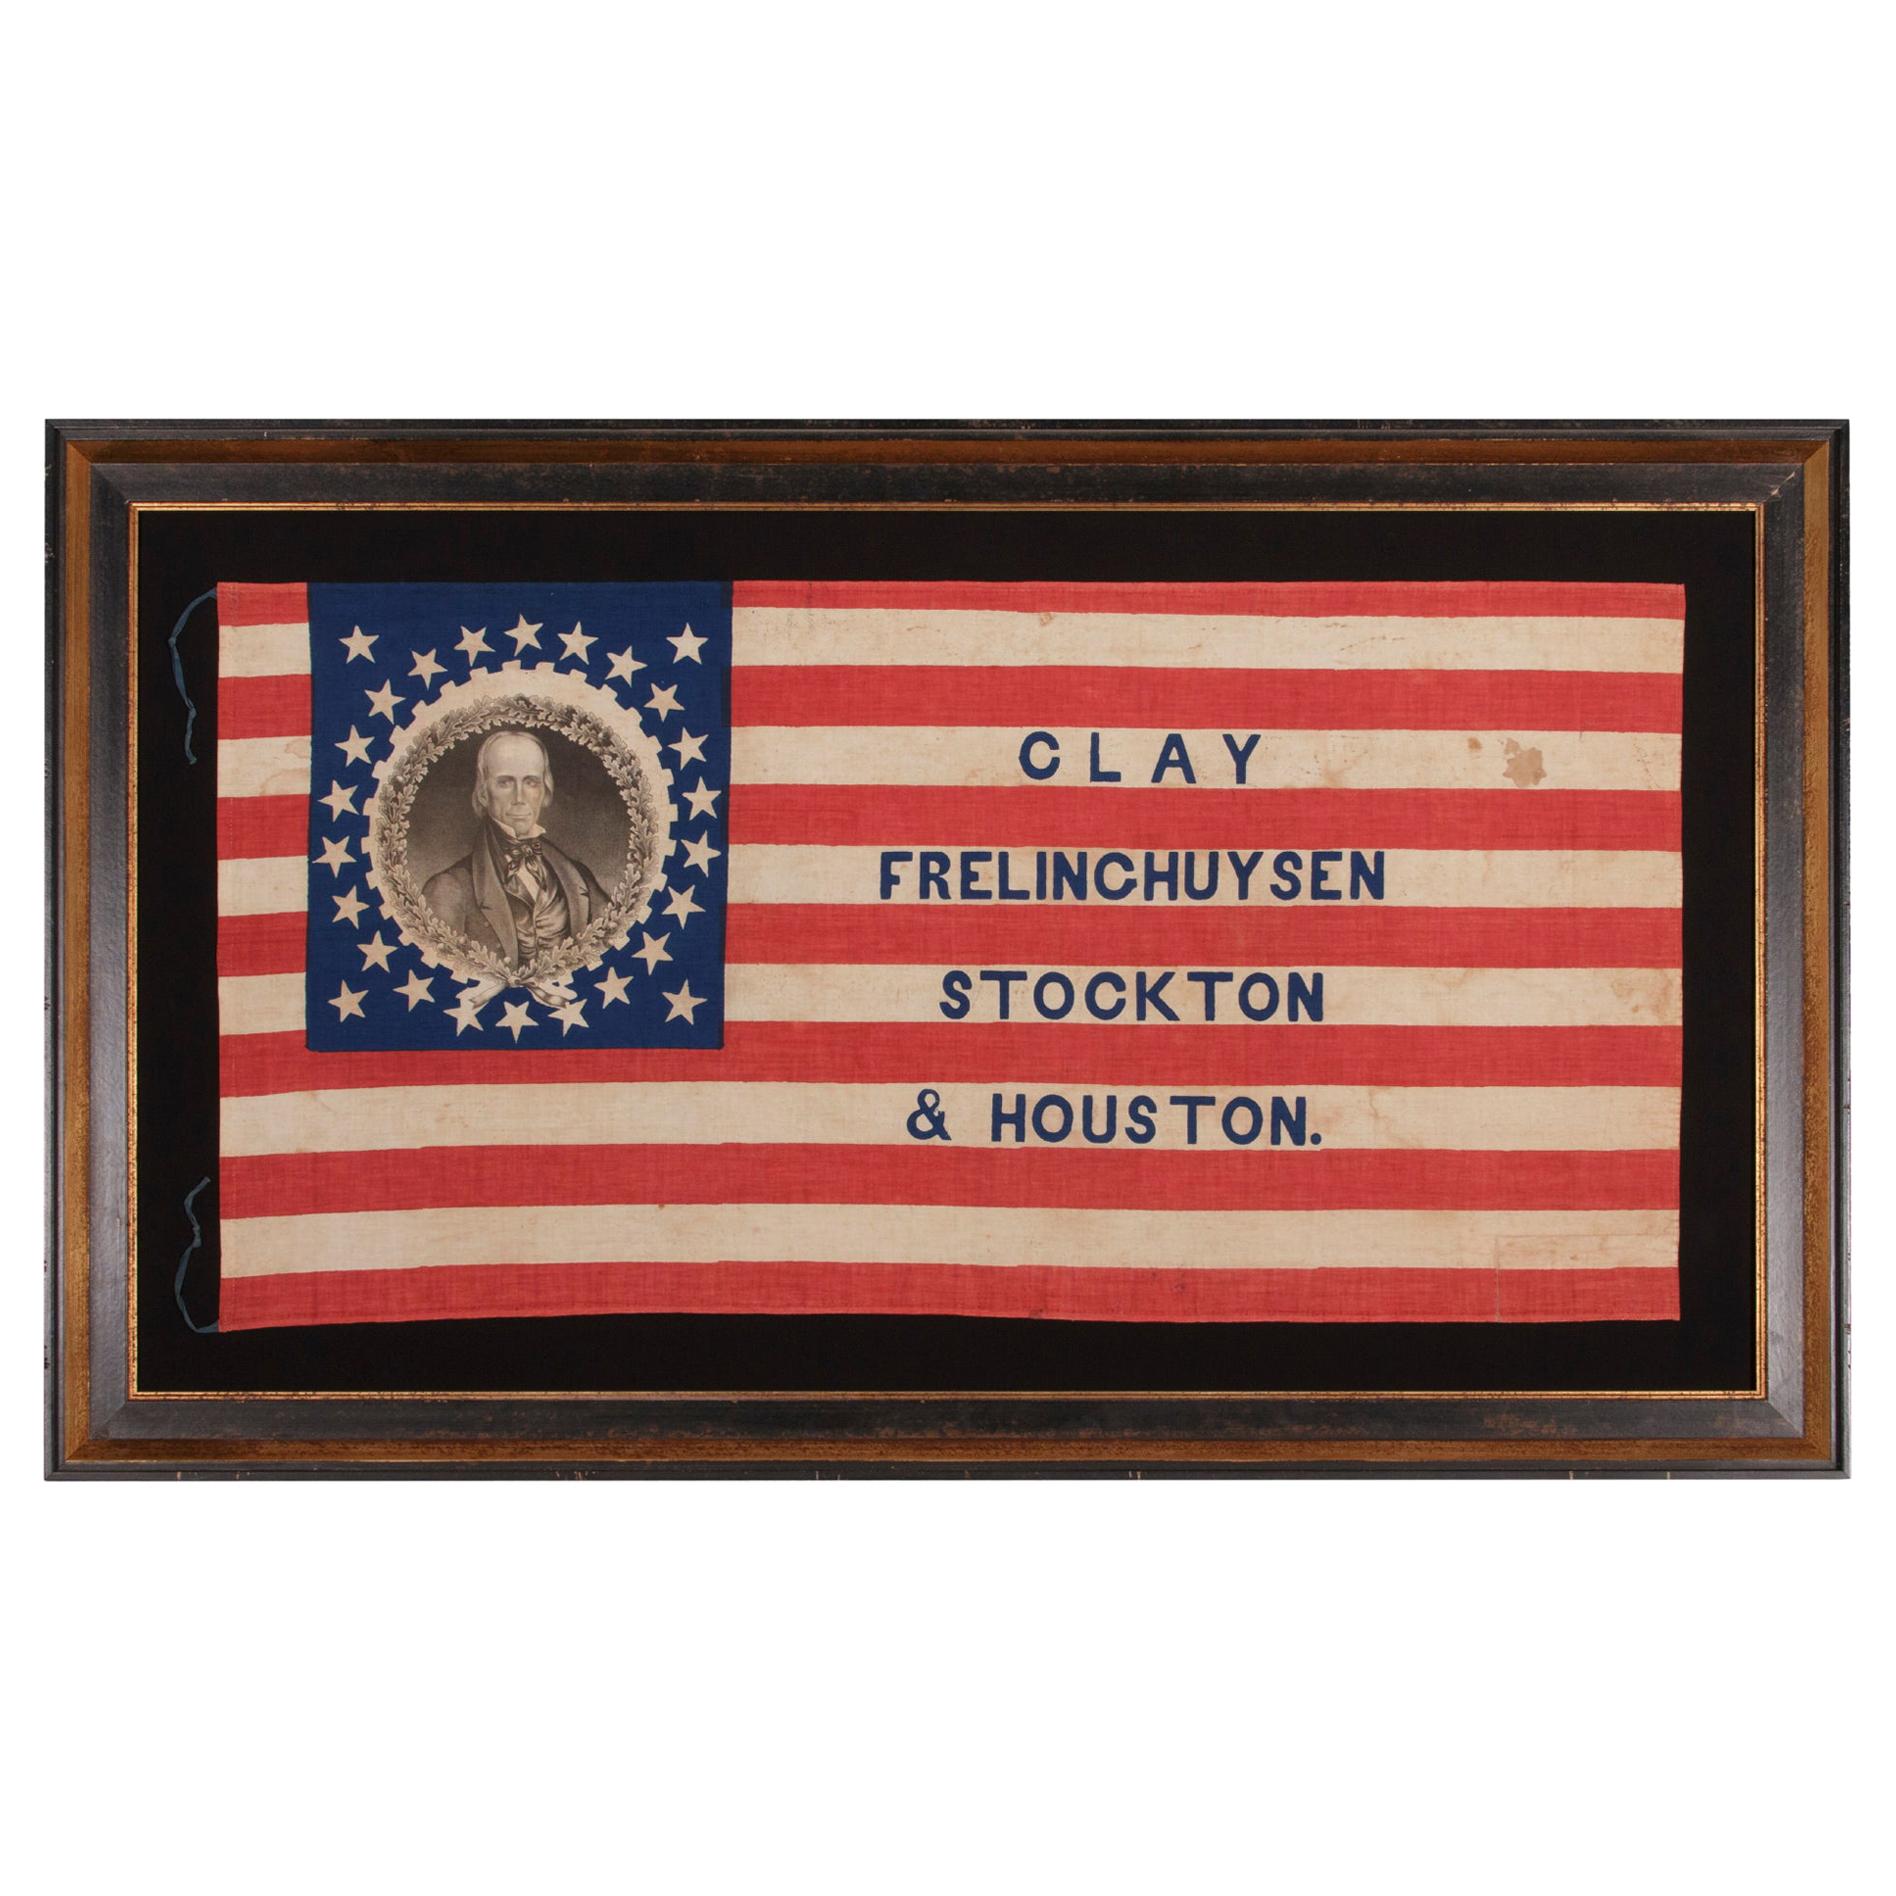 26 Star American Presidential Campaign flag of H. Clay & T. Frelinghuysen, 1844